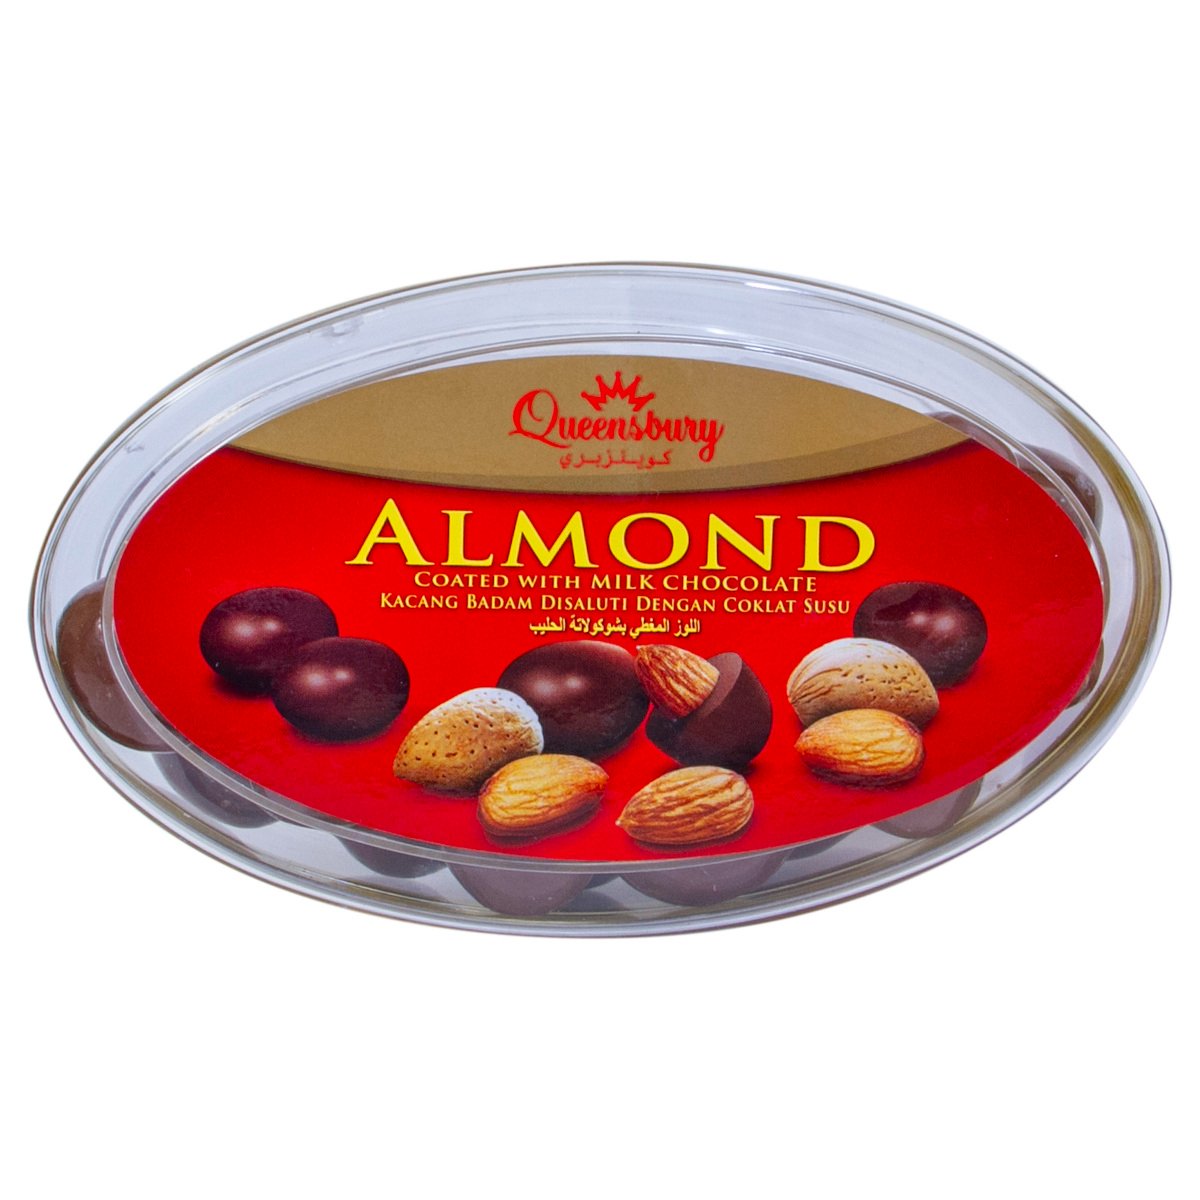 Queensbury Almond Coated With Milk Chocolate 207 g